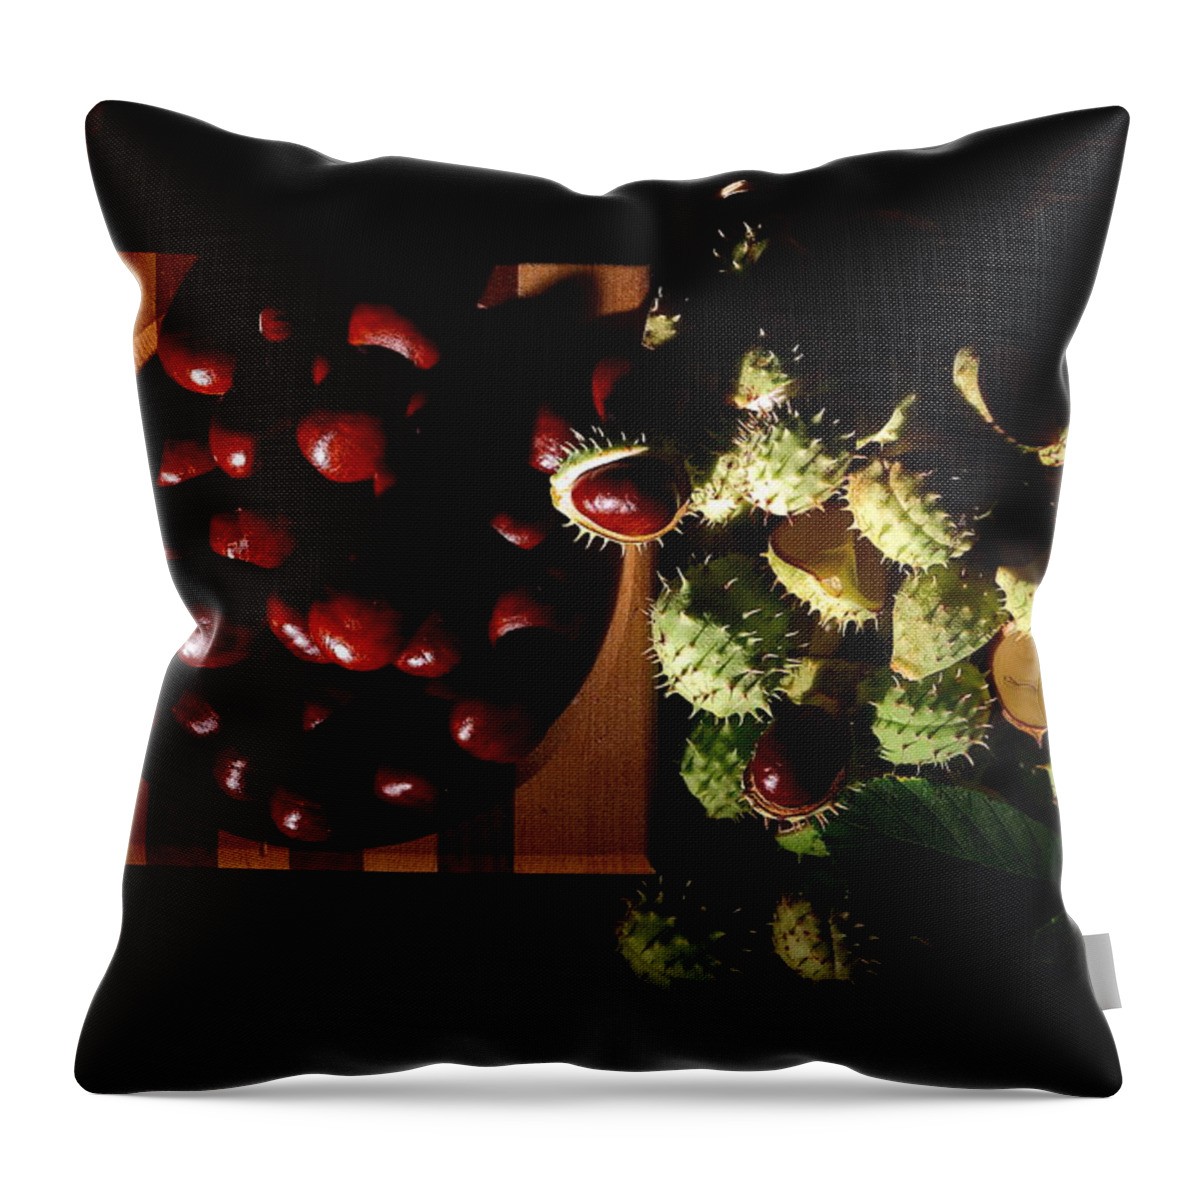 Chestnuts Throw Pillow featuring the photograph Chestnuts by David Andersen